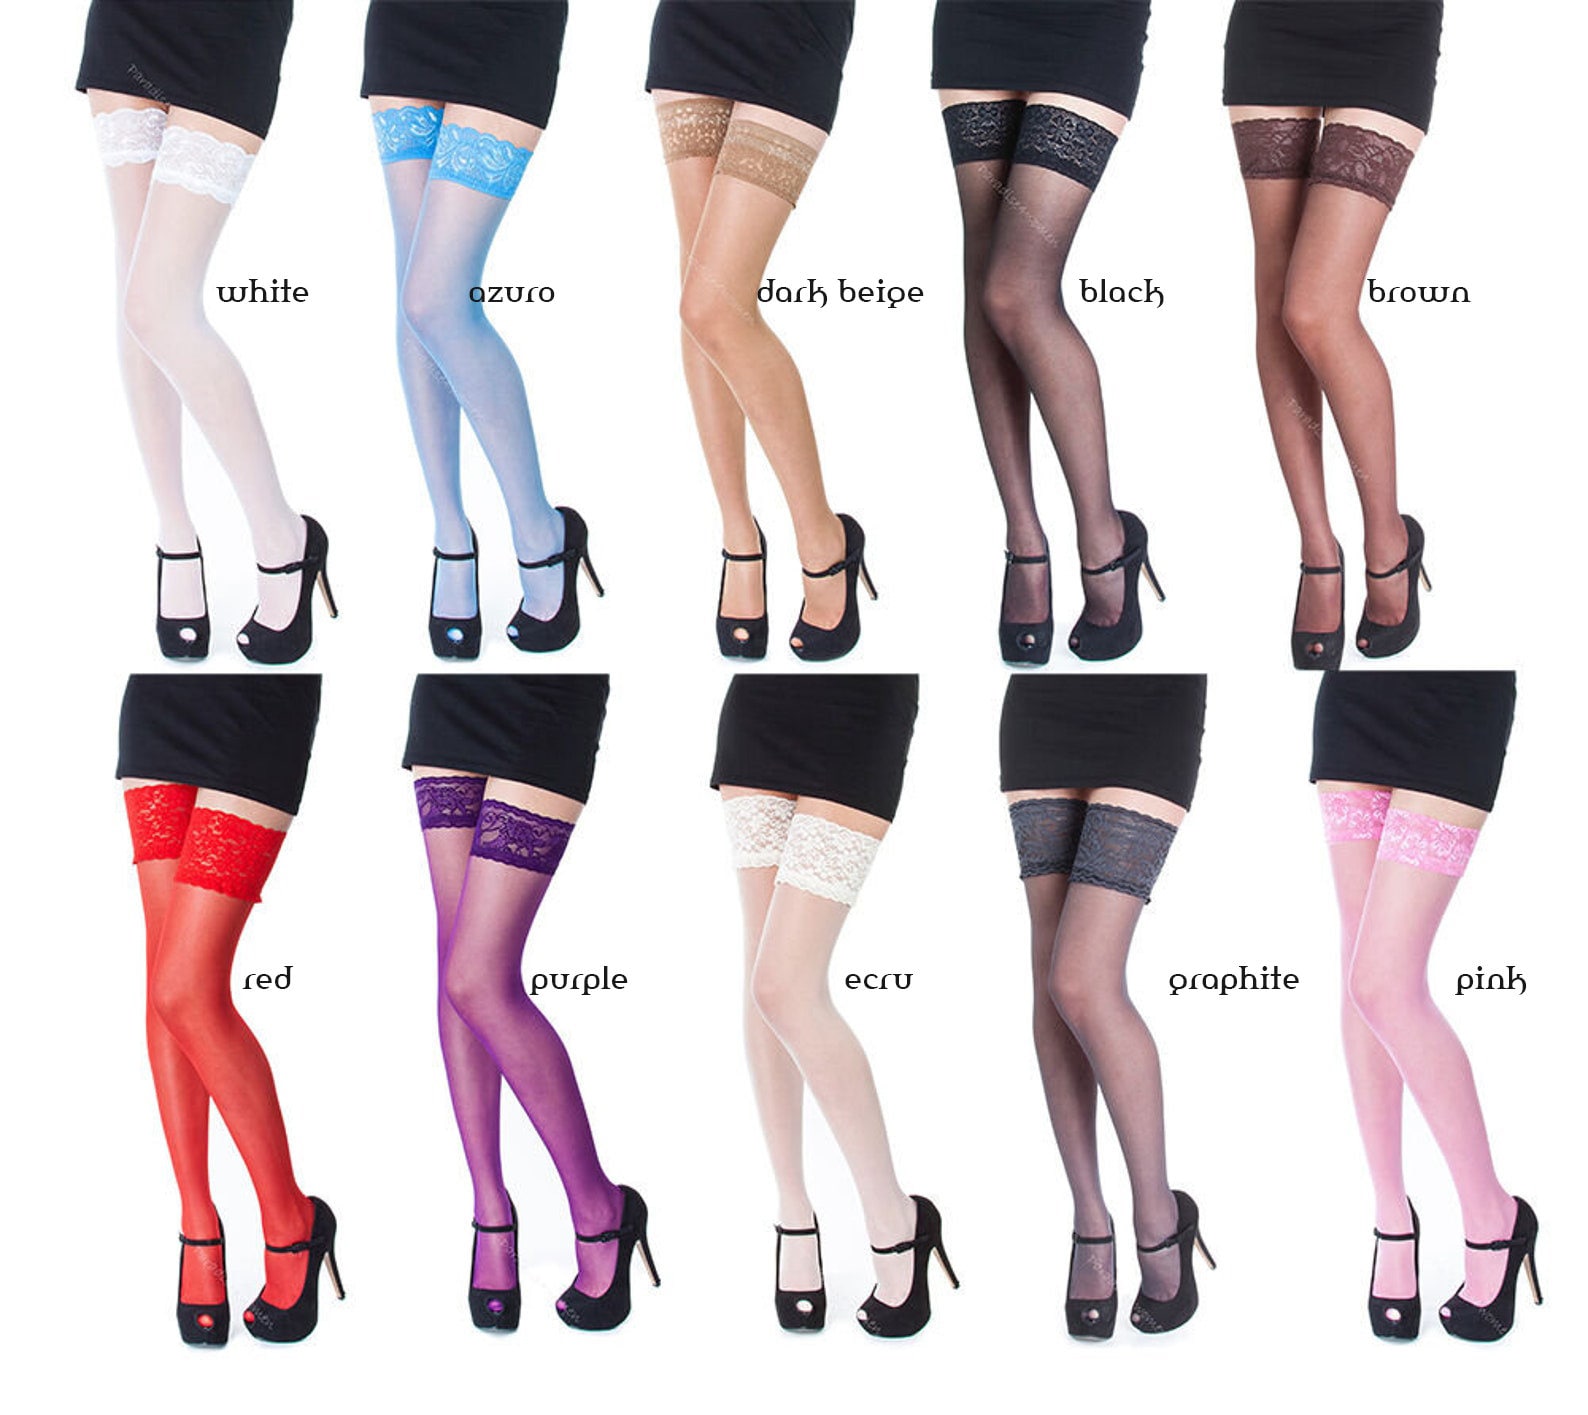 Silk Stockings Silk Stockings for Women Thigh High Stockings 5 PCS Nylon  Lace Top Stay Up Silky Semi Sheer Knee Stocking for Women 